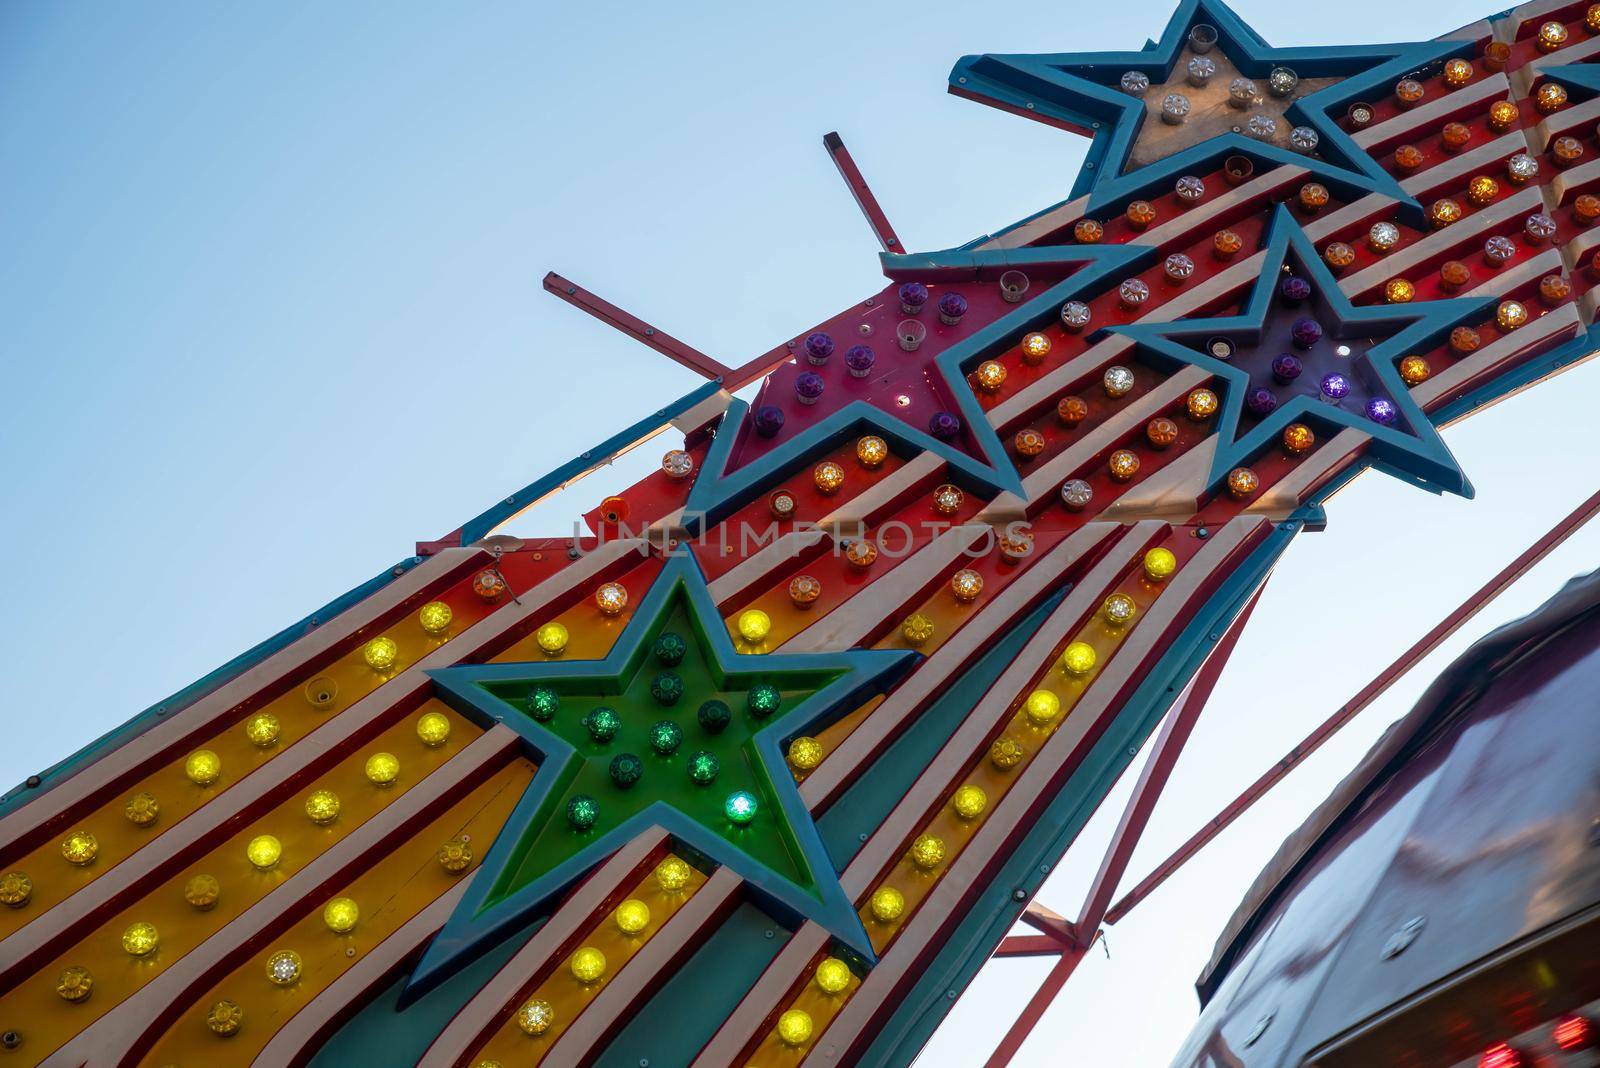 Exciting colorful lights in shooting star patterns with broken stars and bright colors no people in this nostalgic country fair shot with copy space.